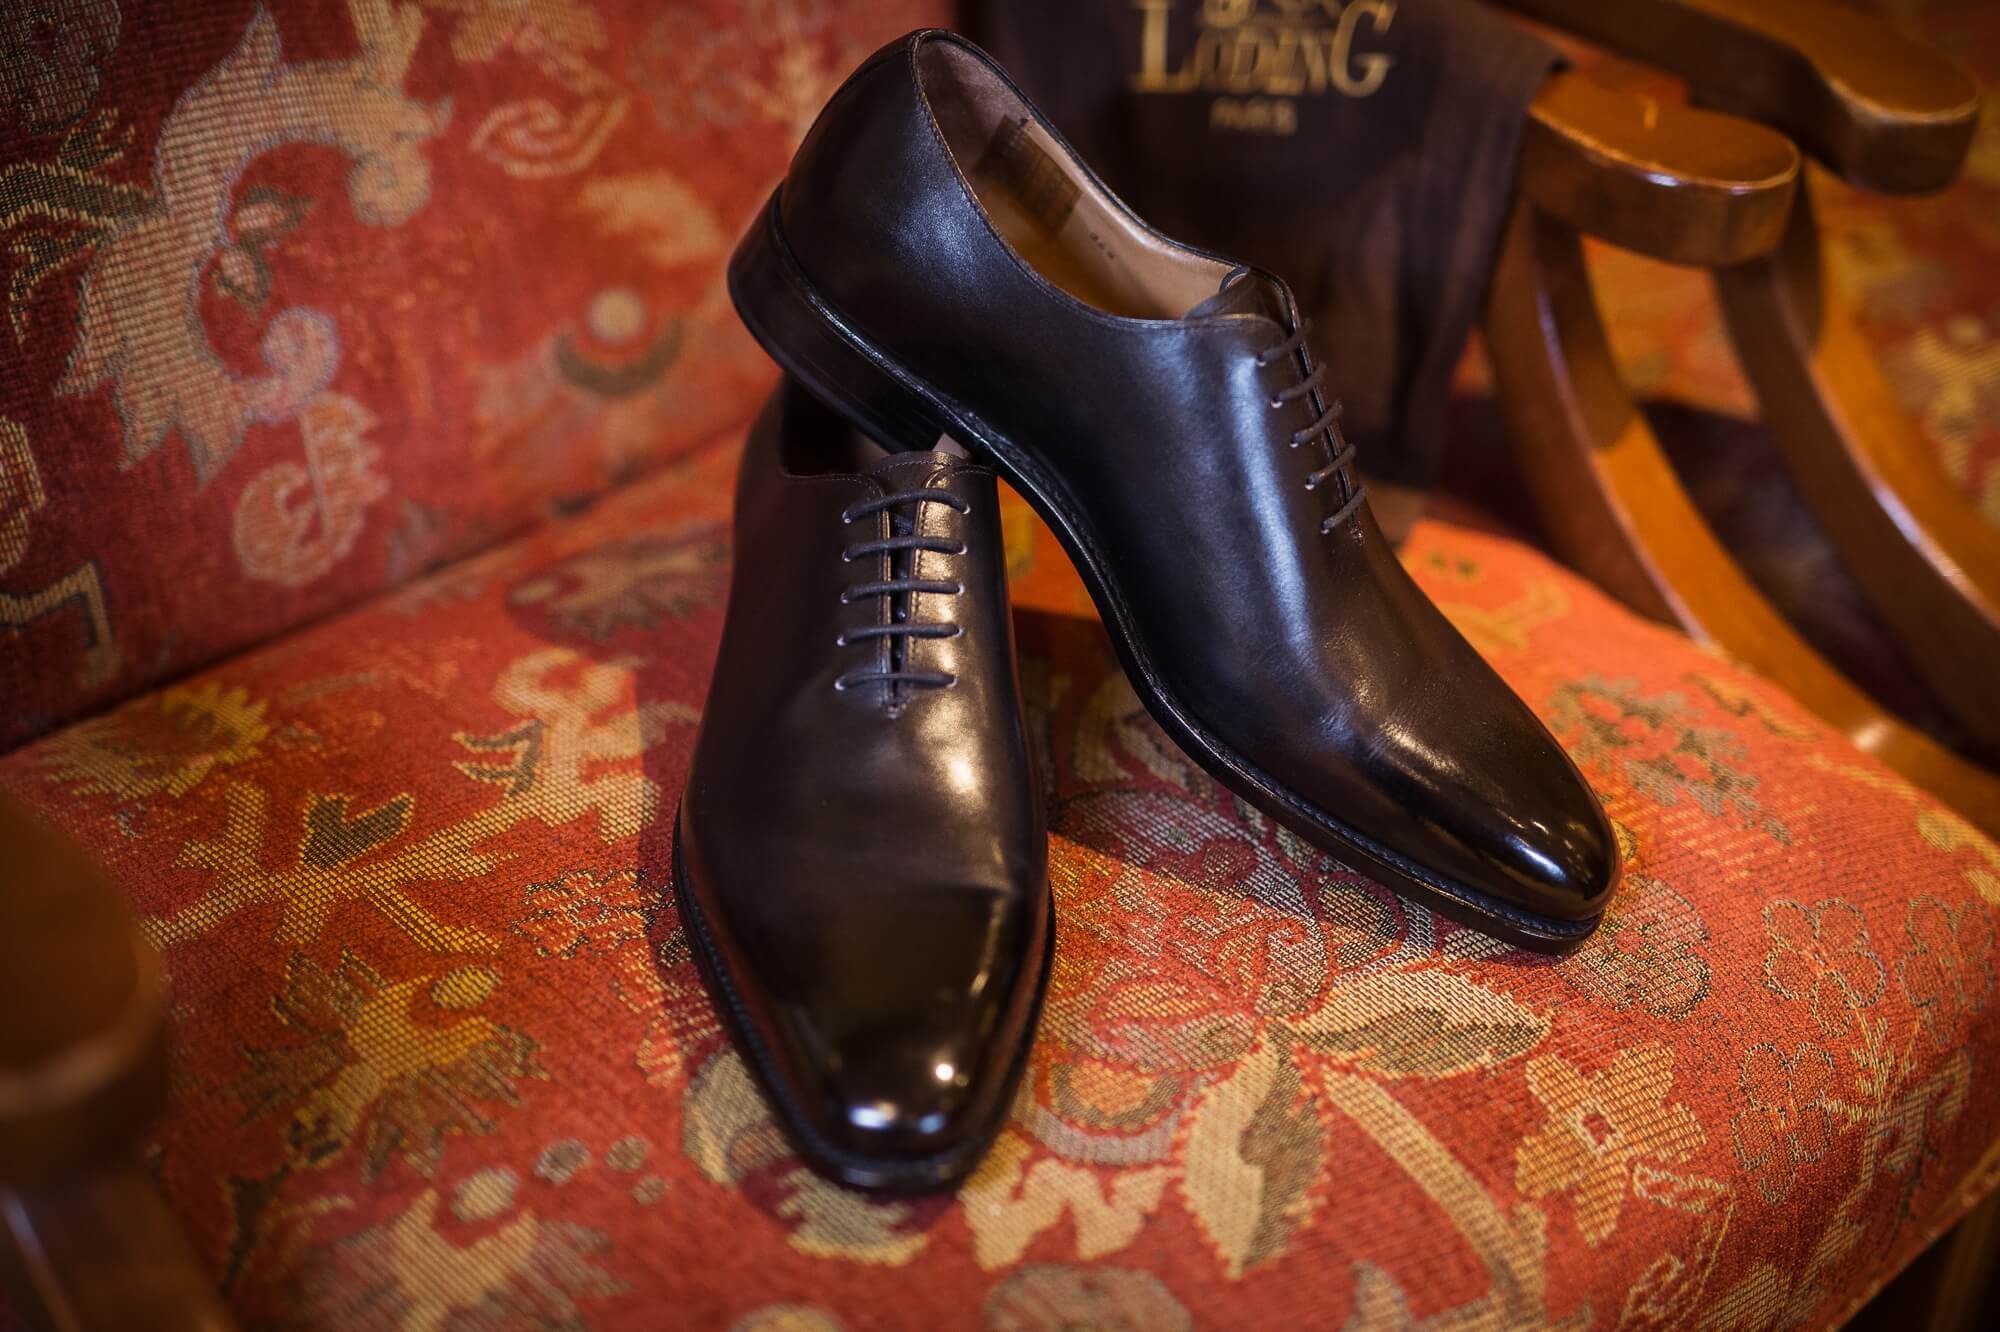 Details of the Grooms black lace shoes at Lambton G&CC in Toronto